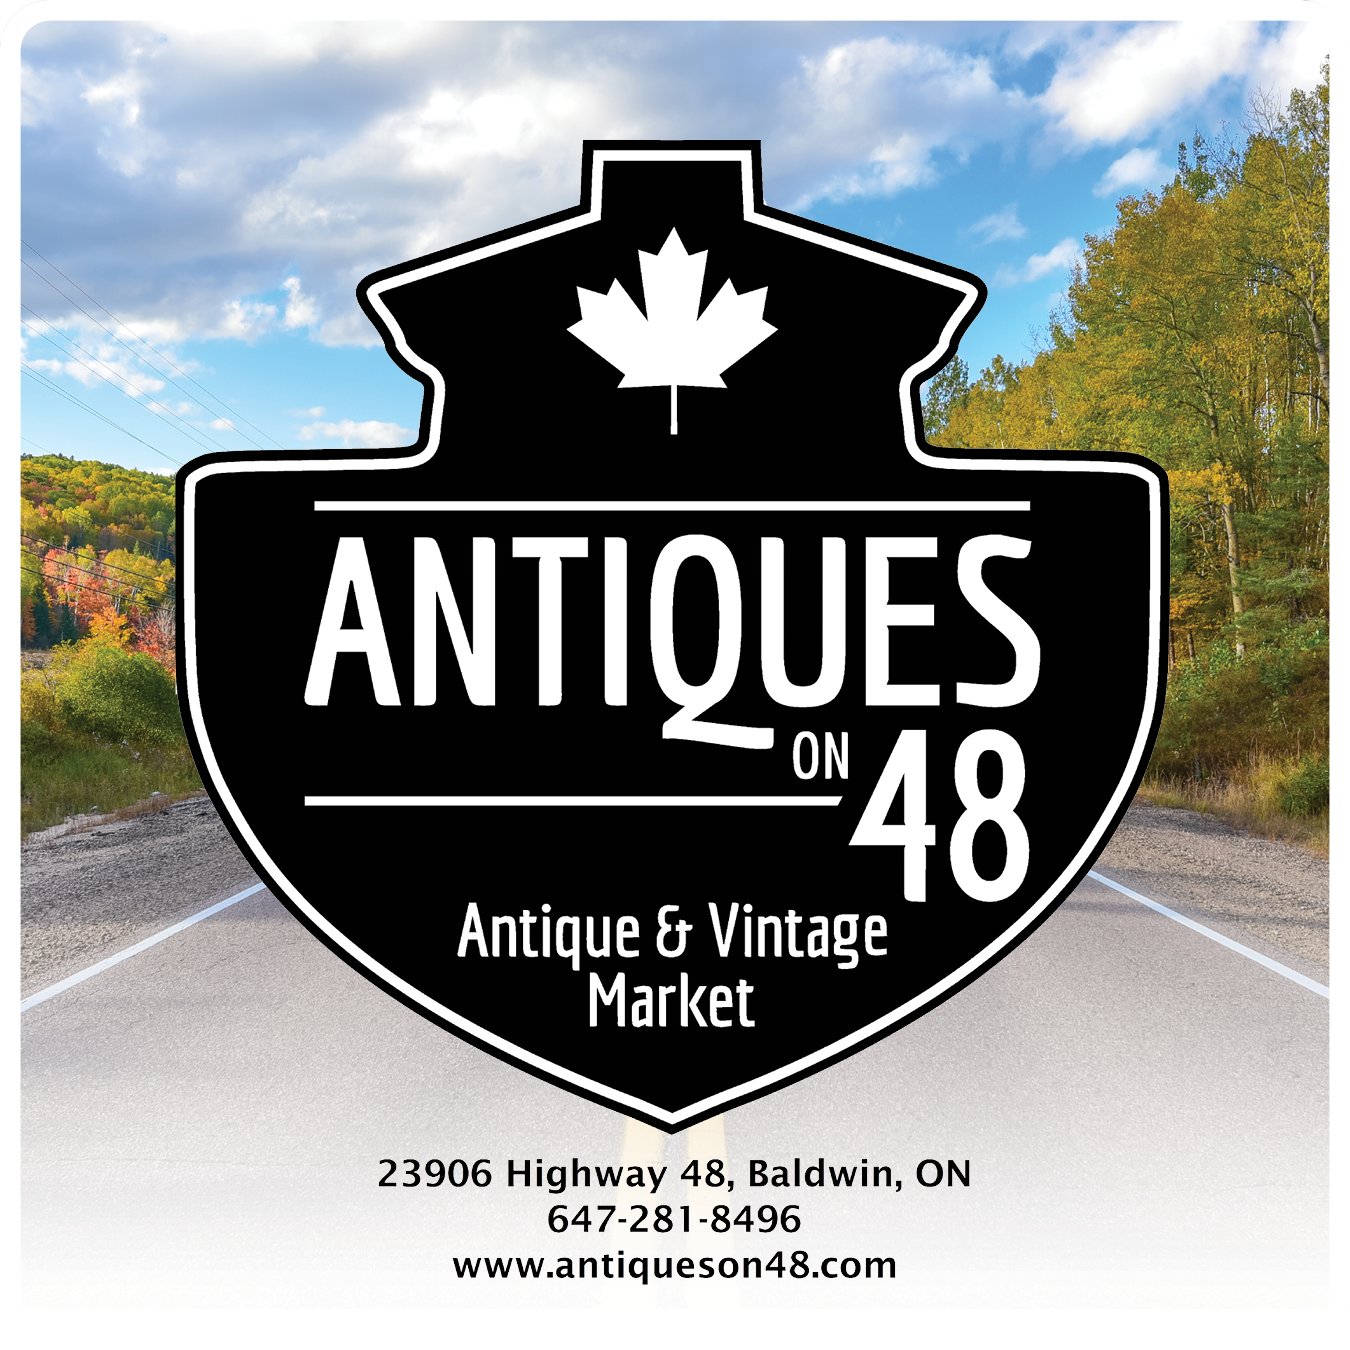 Antiques on 48